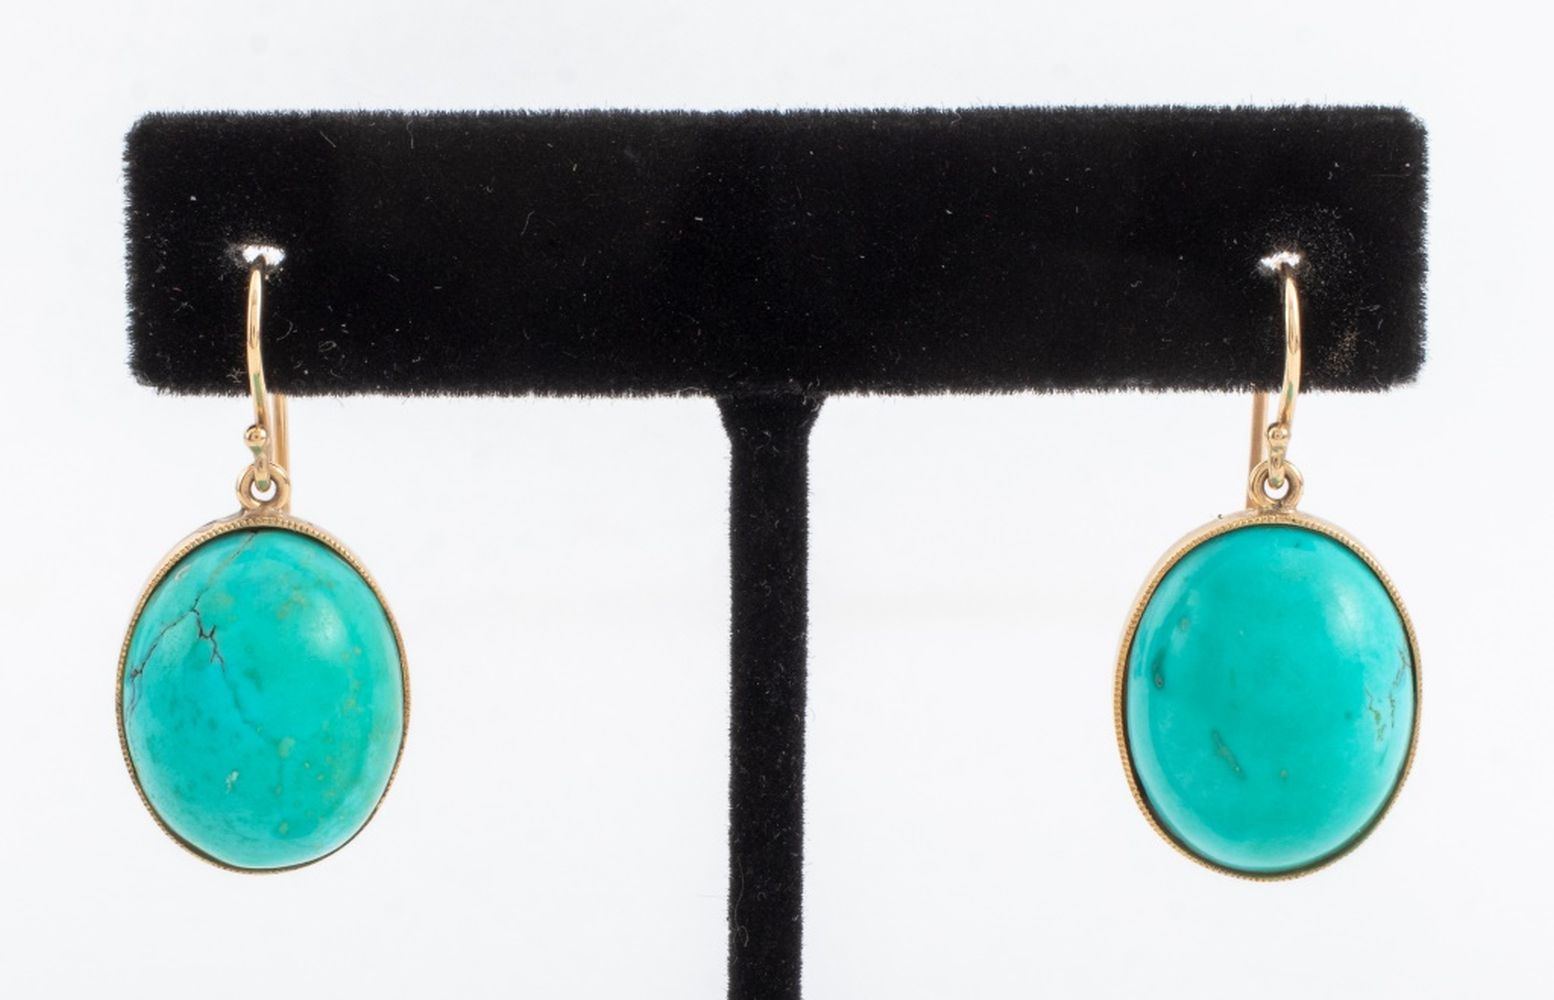 14K YELLOW GOLD TURQUOISE DROP